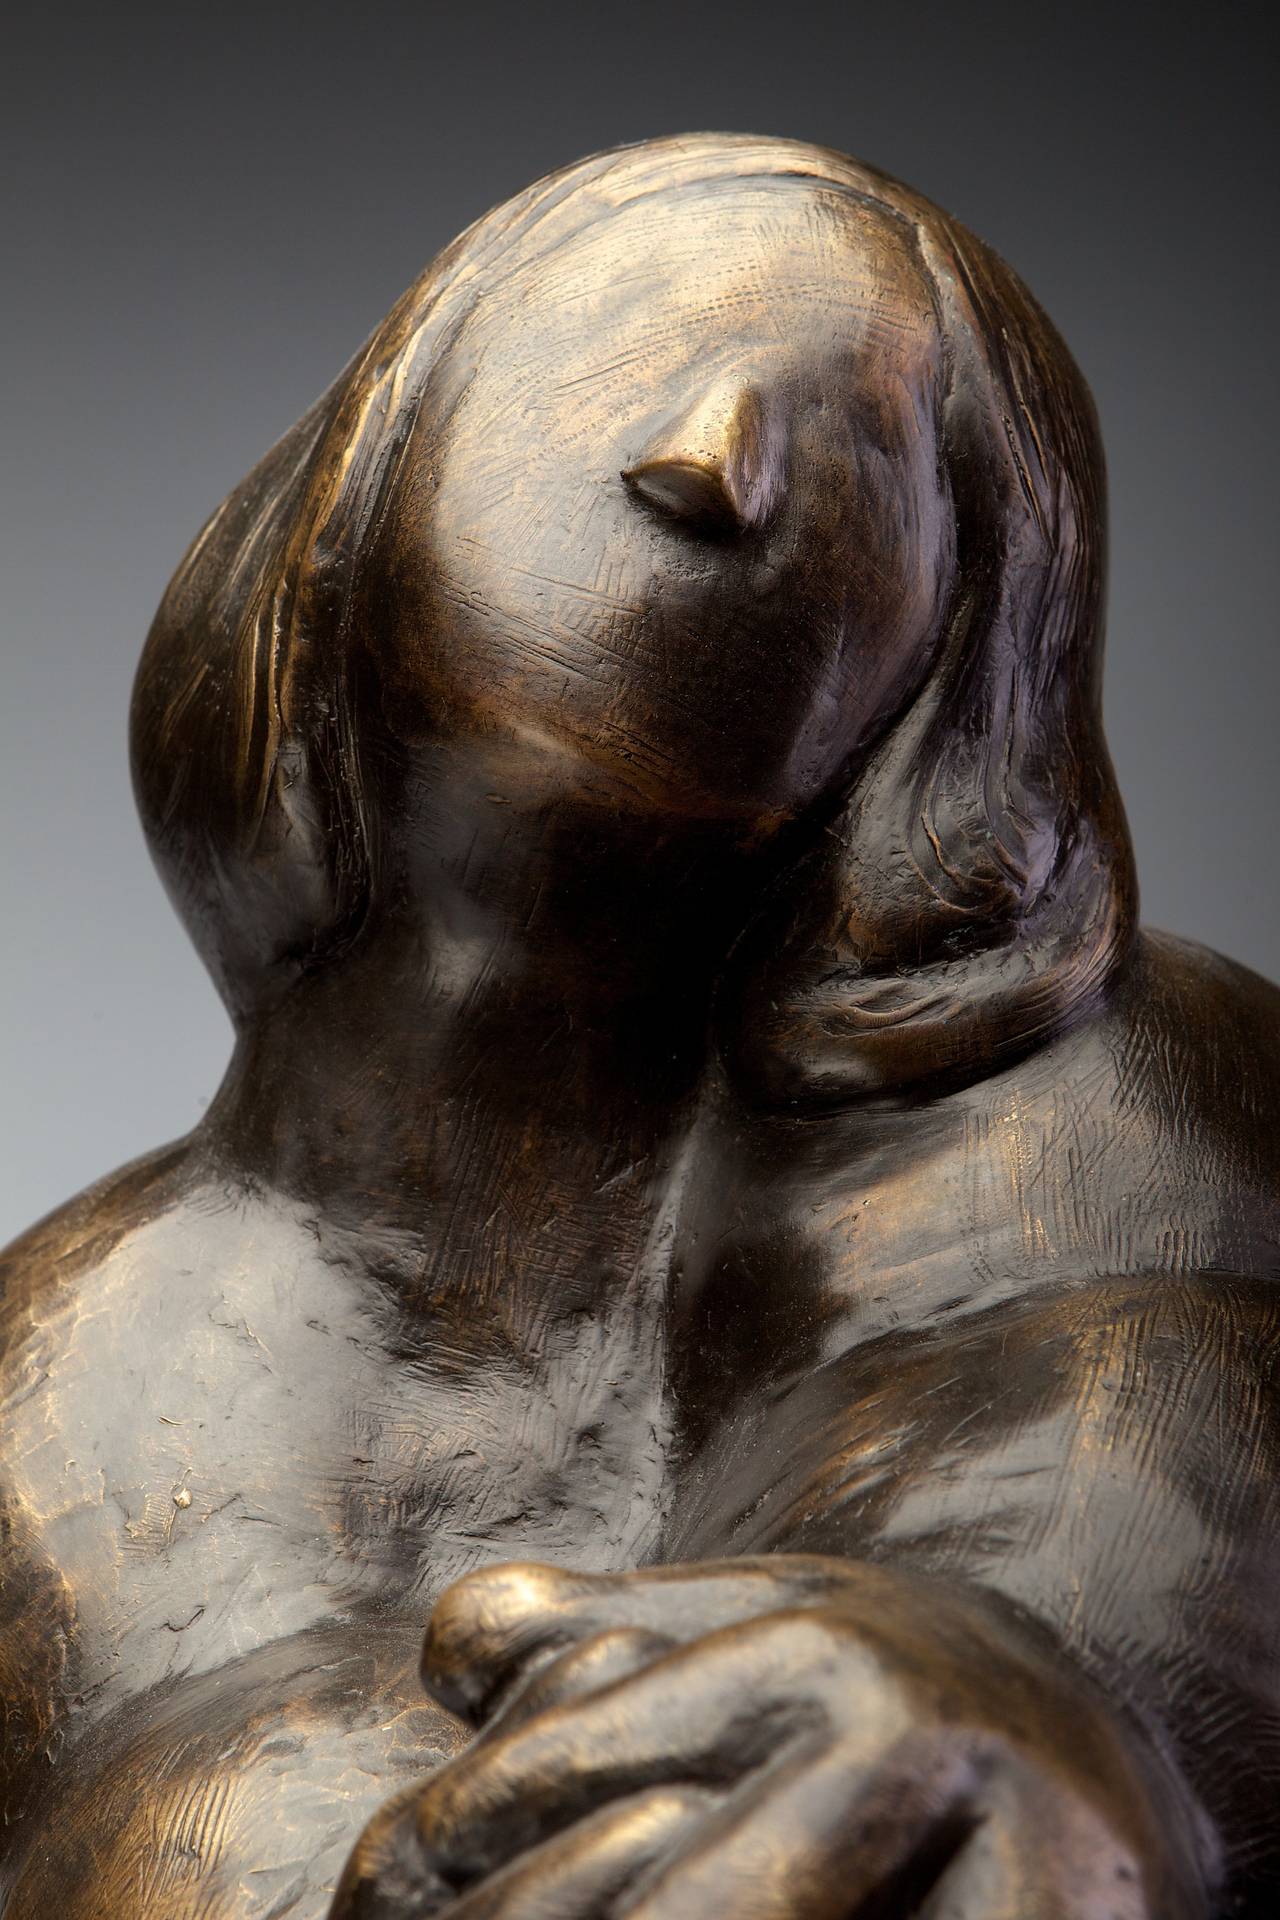 Wiggle My Toes - Gold Figurative Sculpture by Monica Wyatt